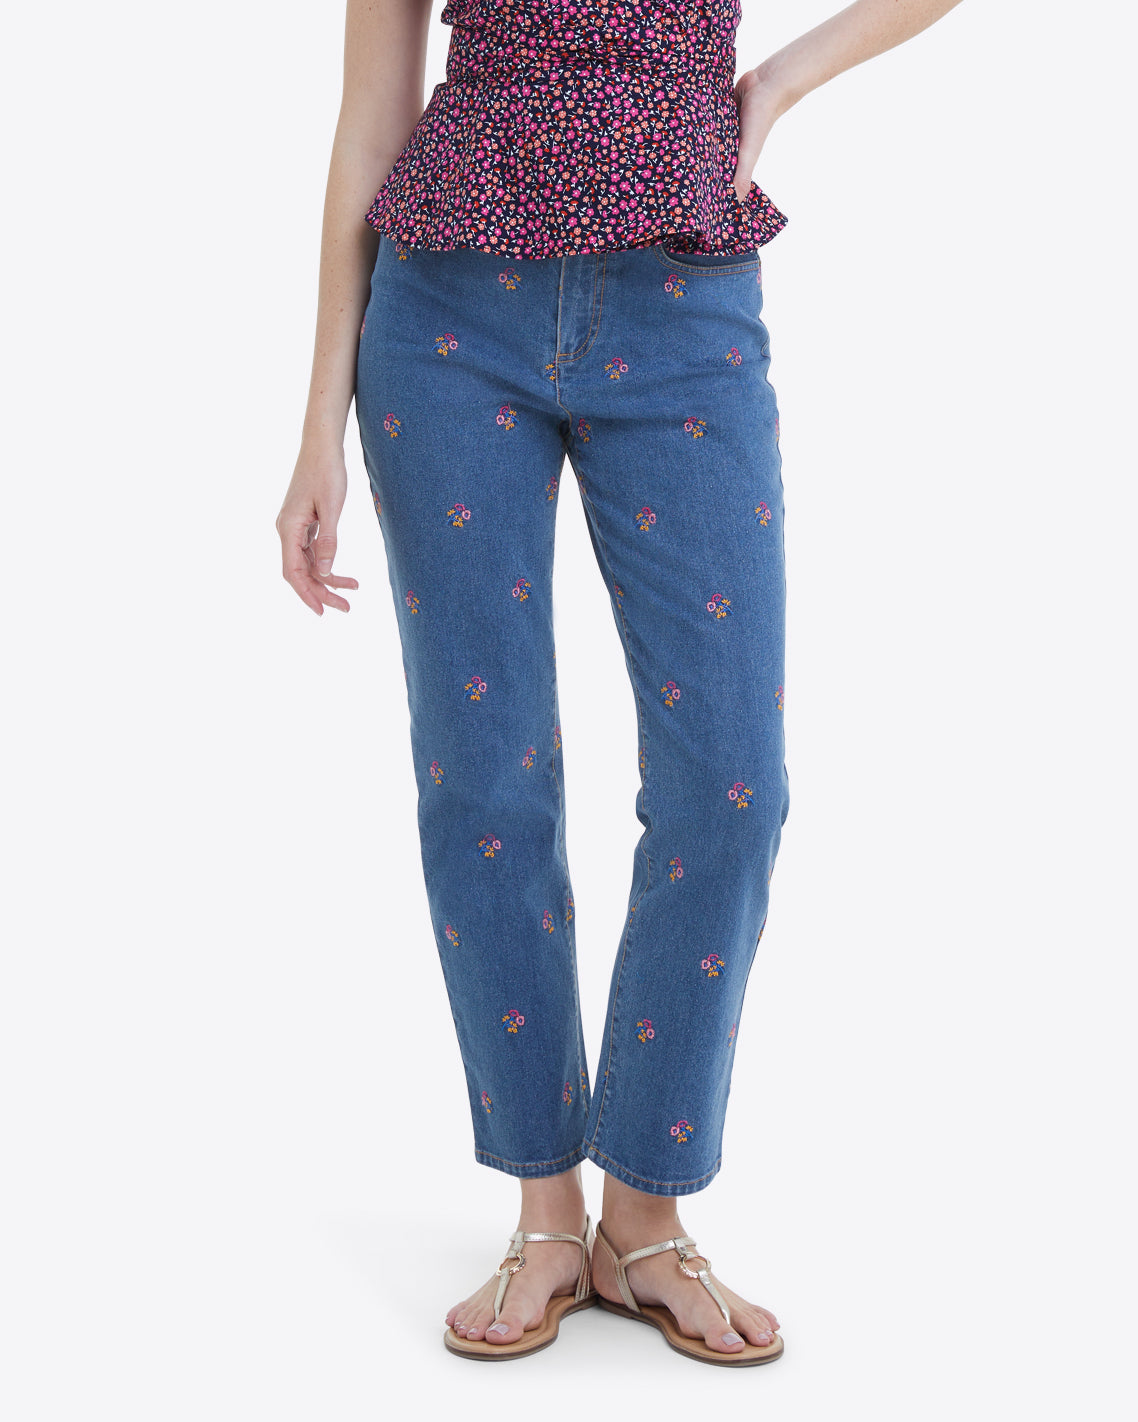 Kick Flare Jeans in Embroidered Posy – Draper James